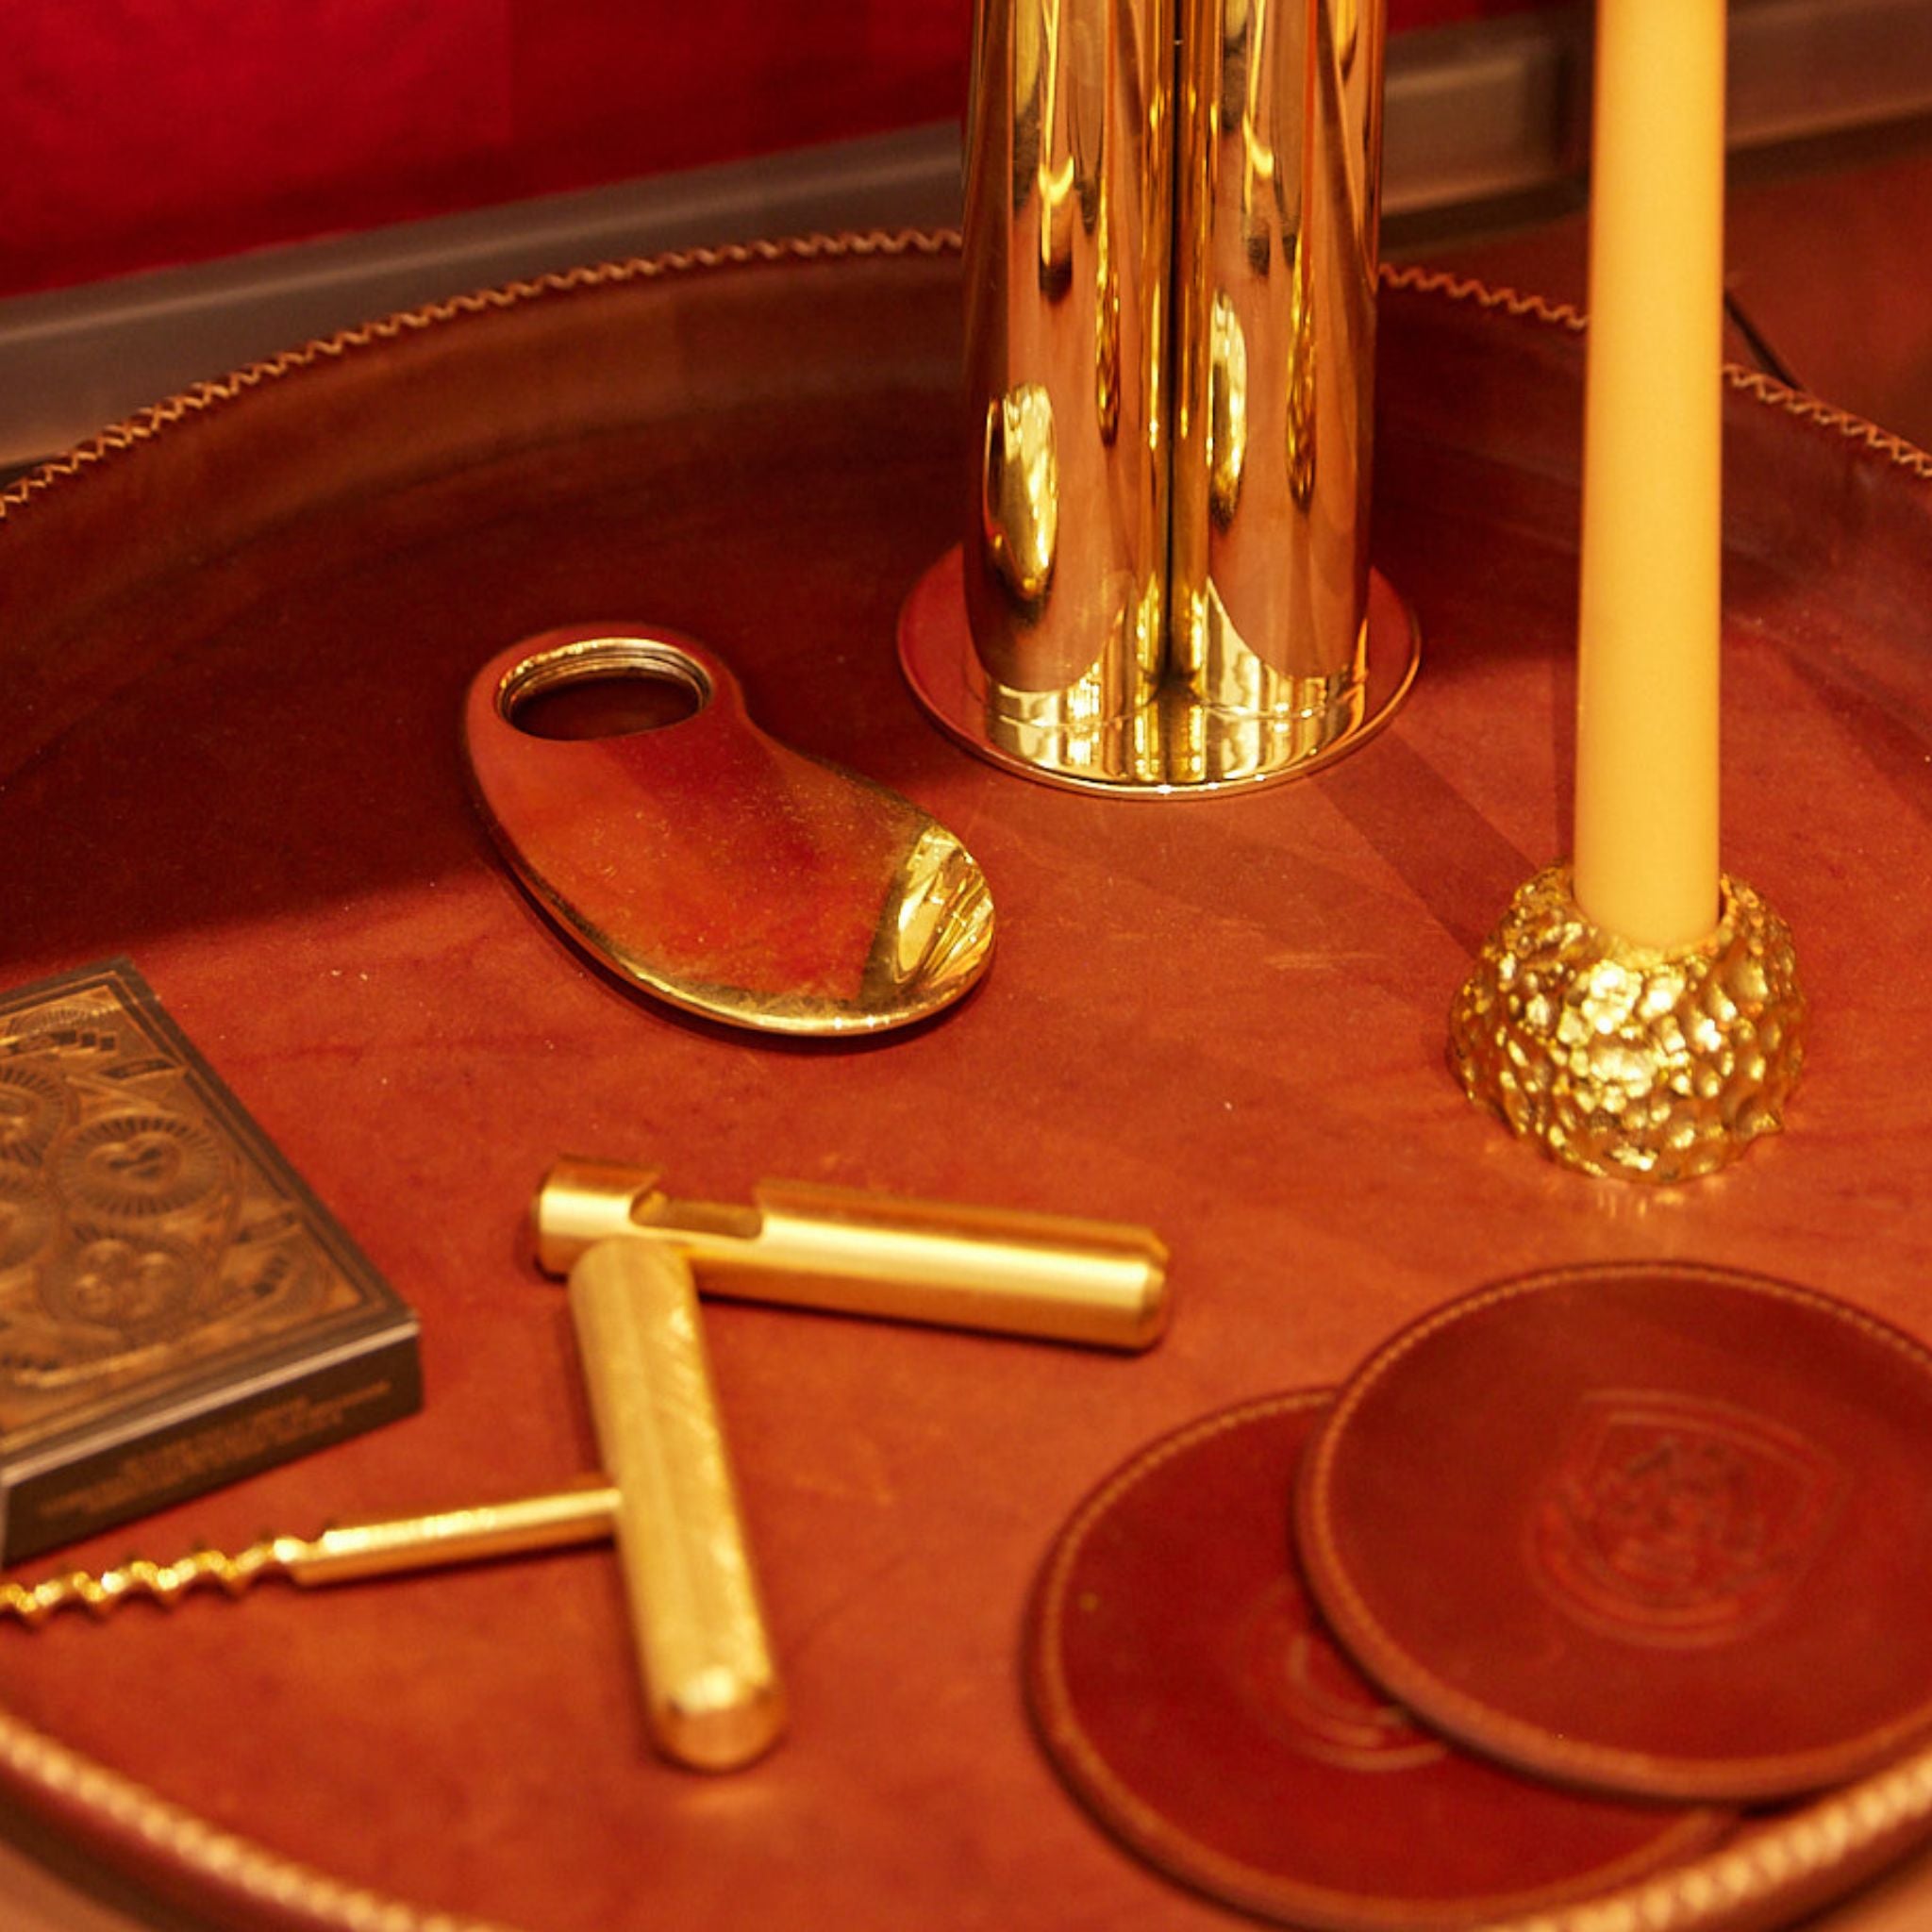 a tray with a candle and some other brass items on it